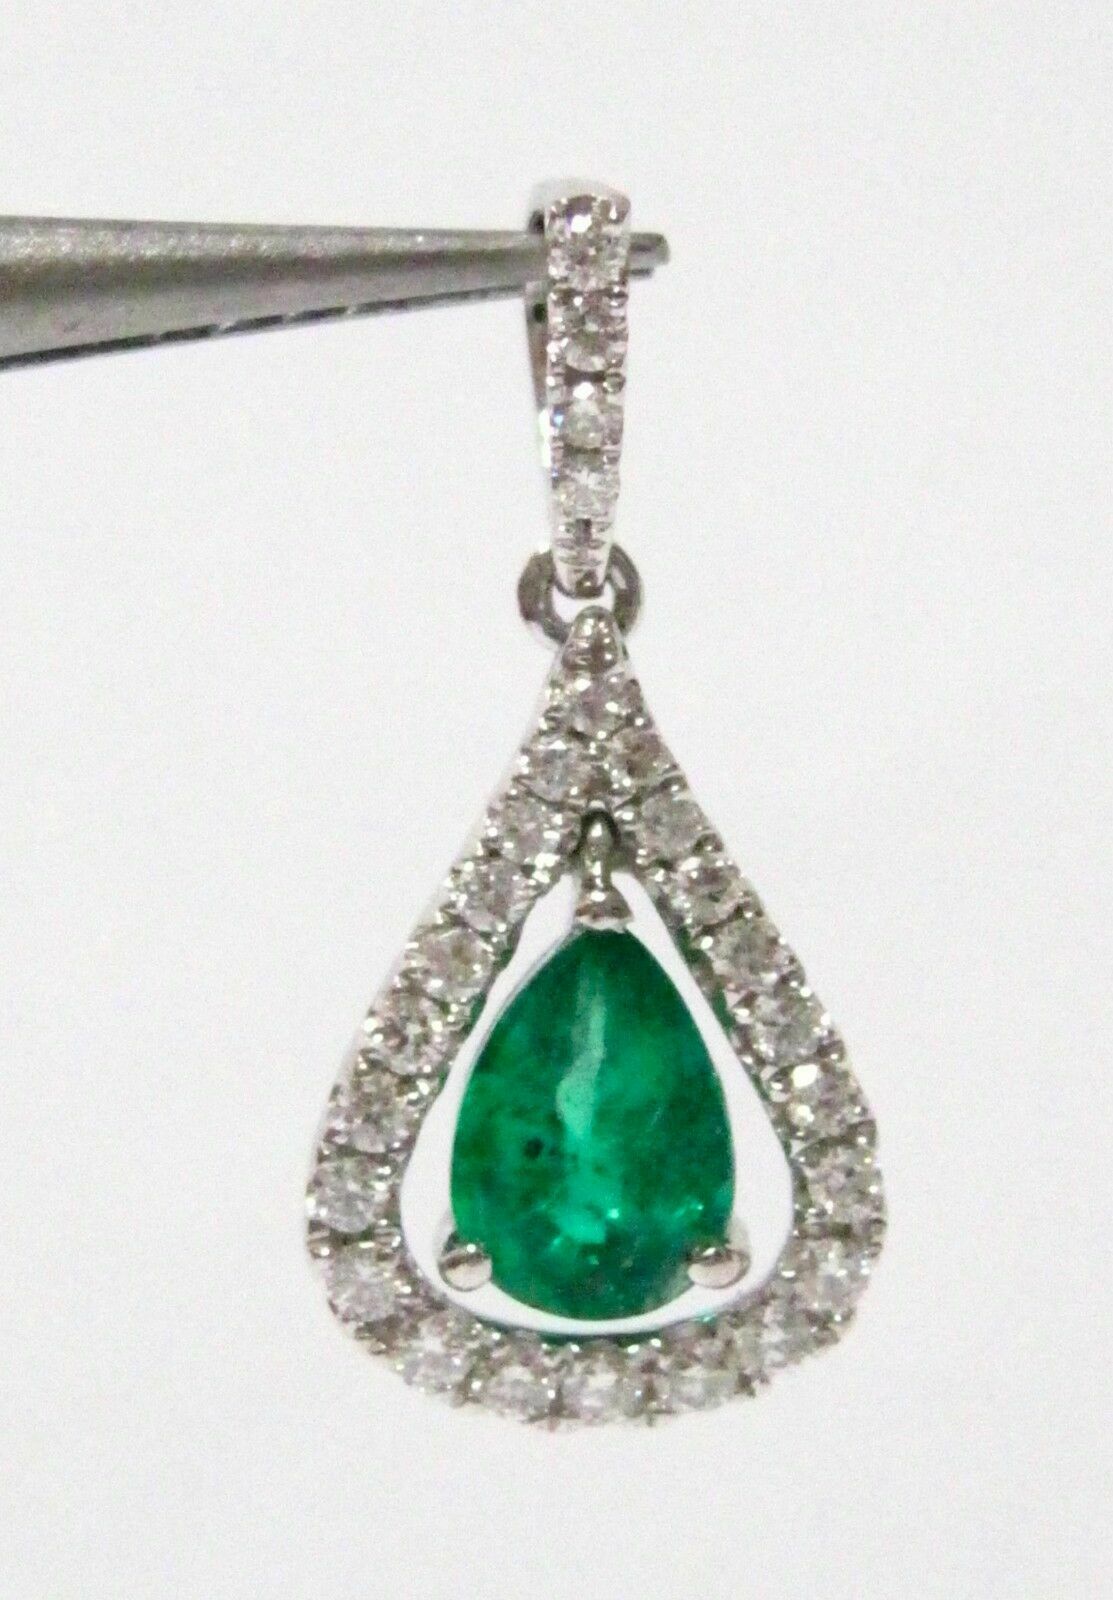 .95 TCW Natural Pear Green Emerald & Round Diamond Accents Pendant 14k Gold